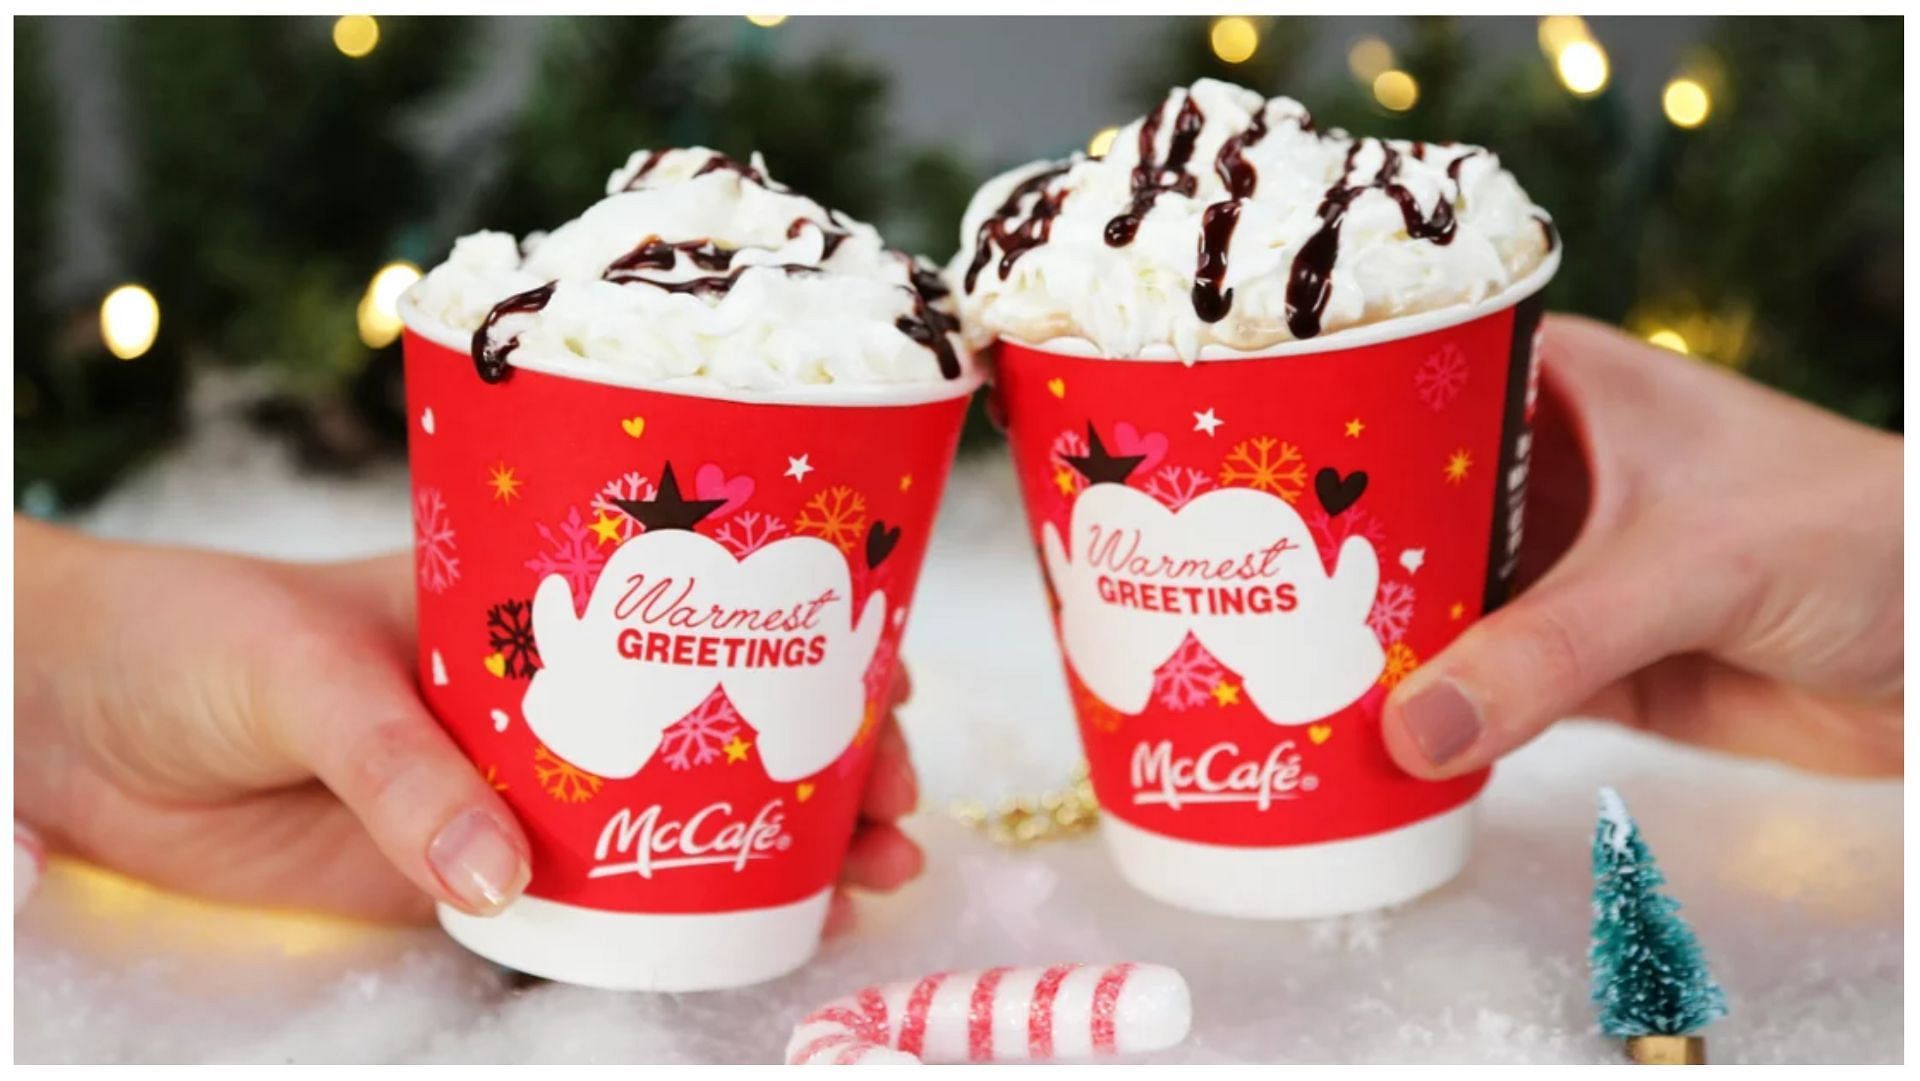 McDonald's brings back Peppermint Mocha and Peppermint Hot Chocolate